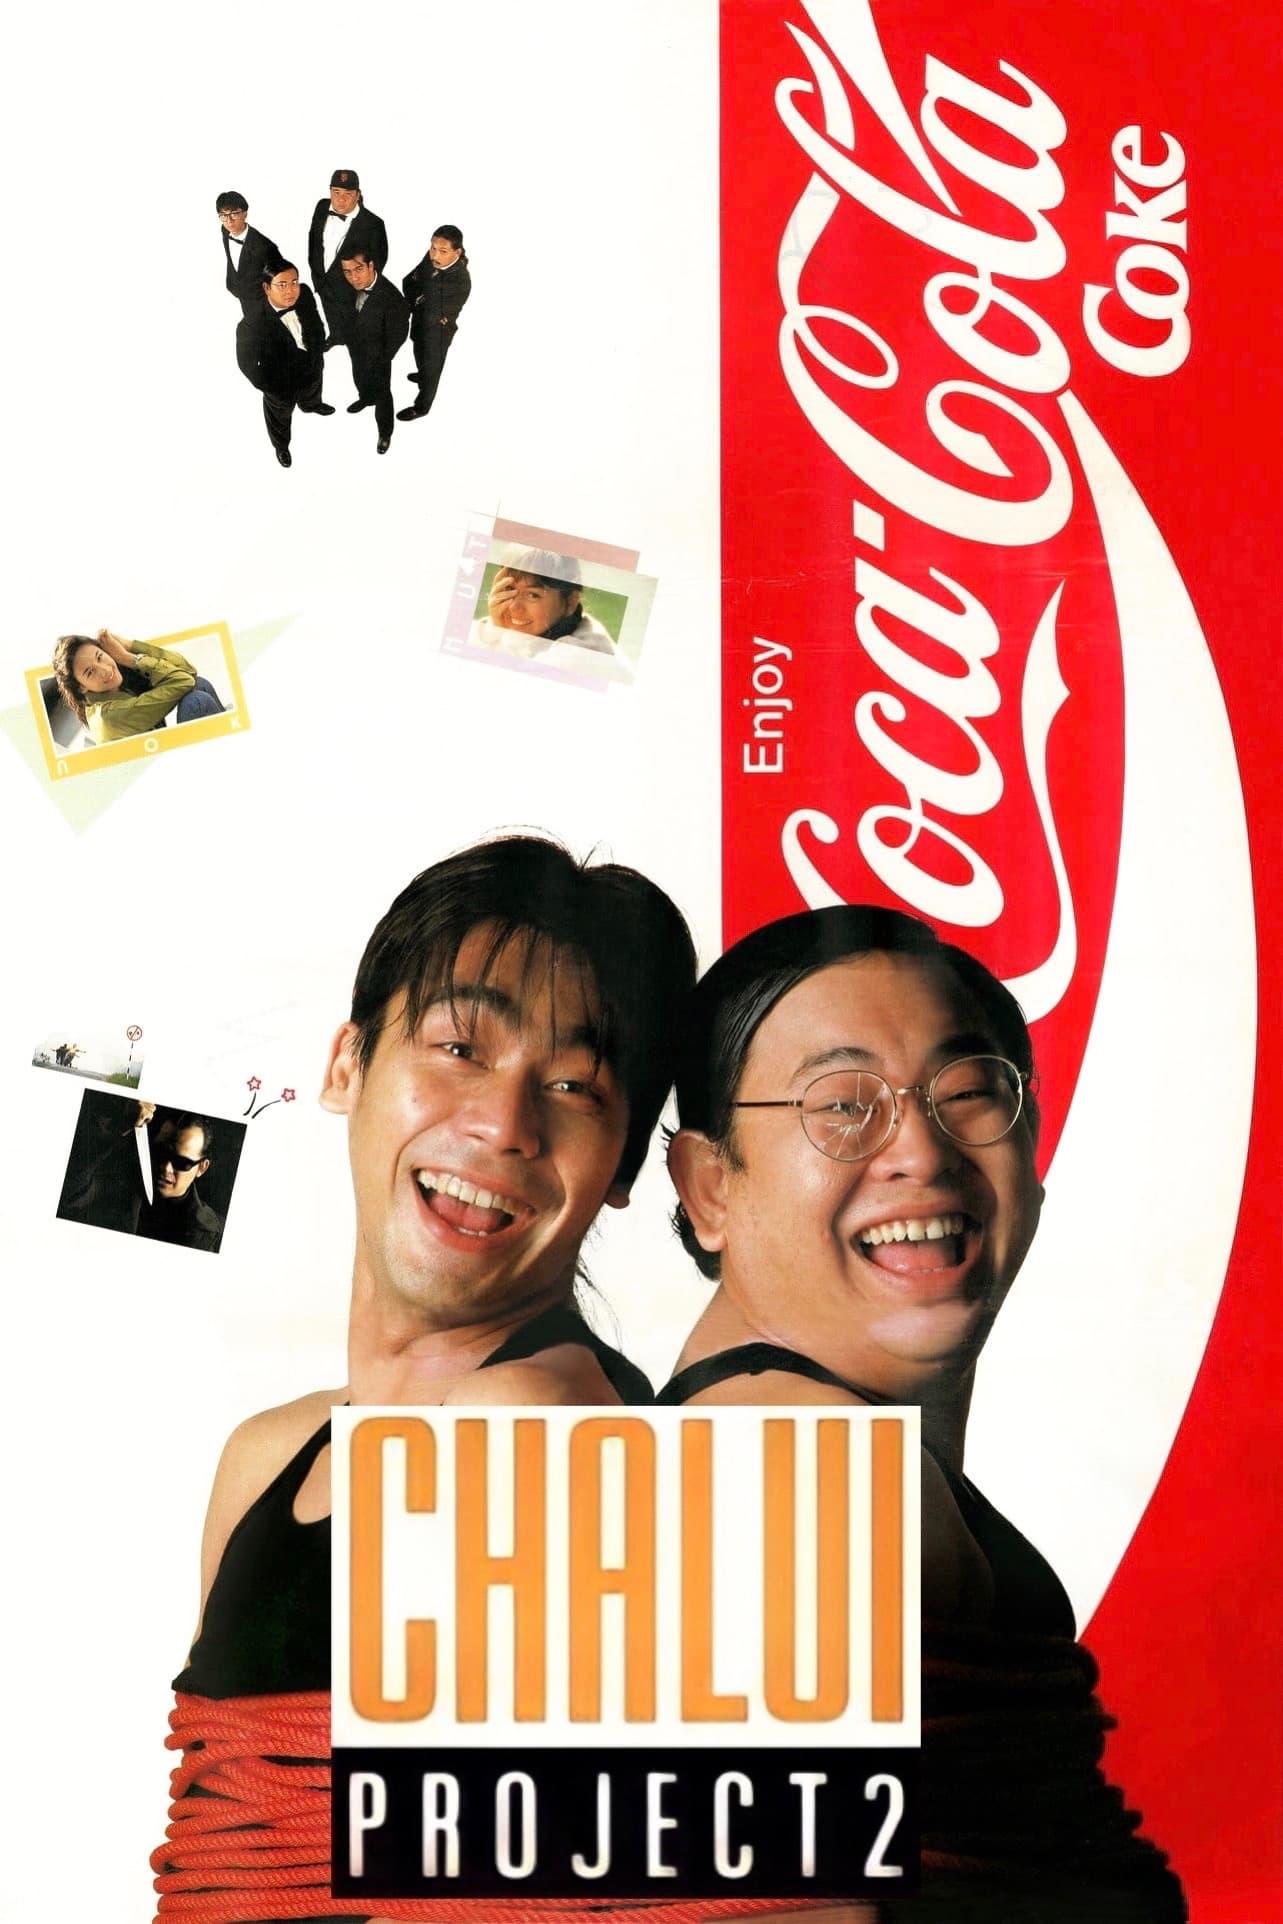 Chalui Project 2 poster